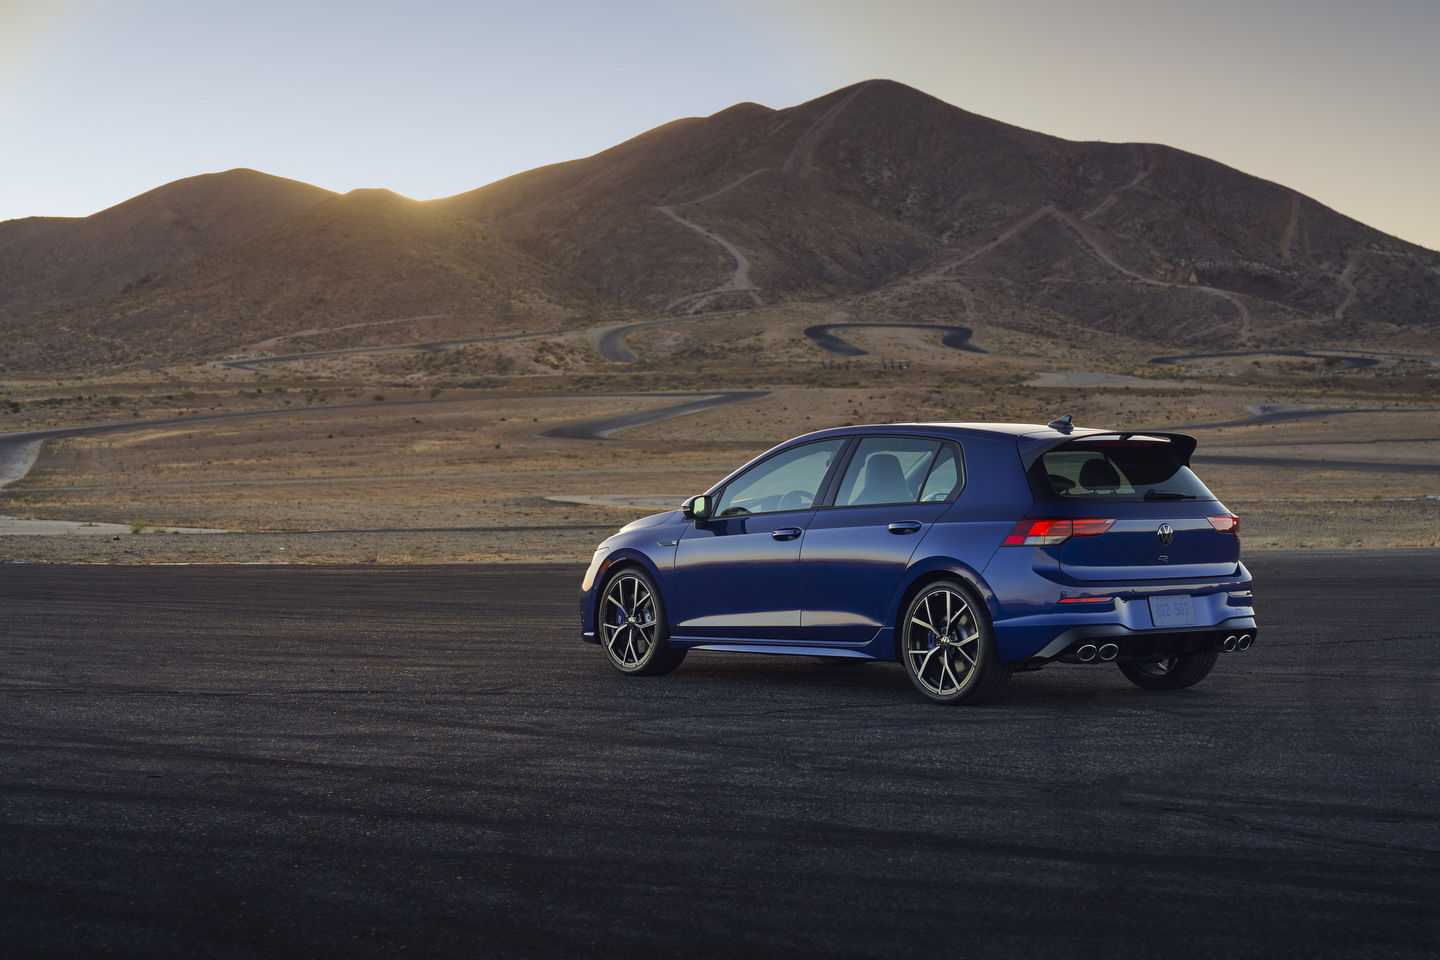 A Quick Look at the 2022 Volkswagen Golf R